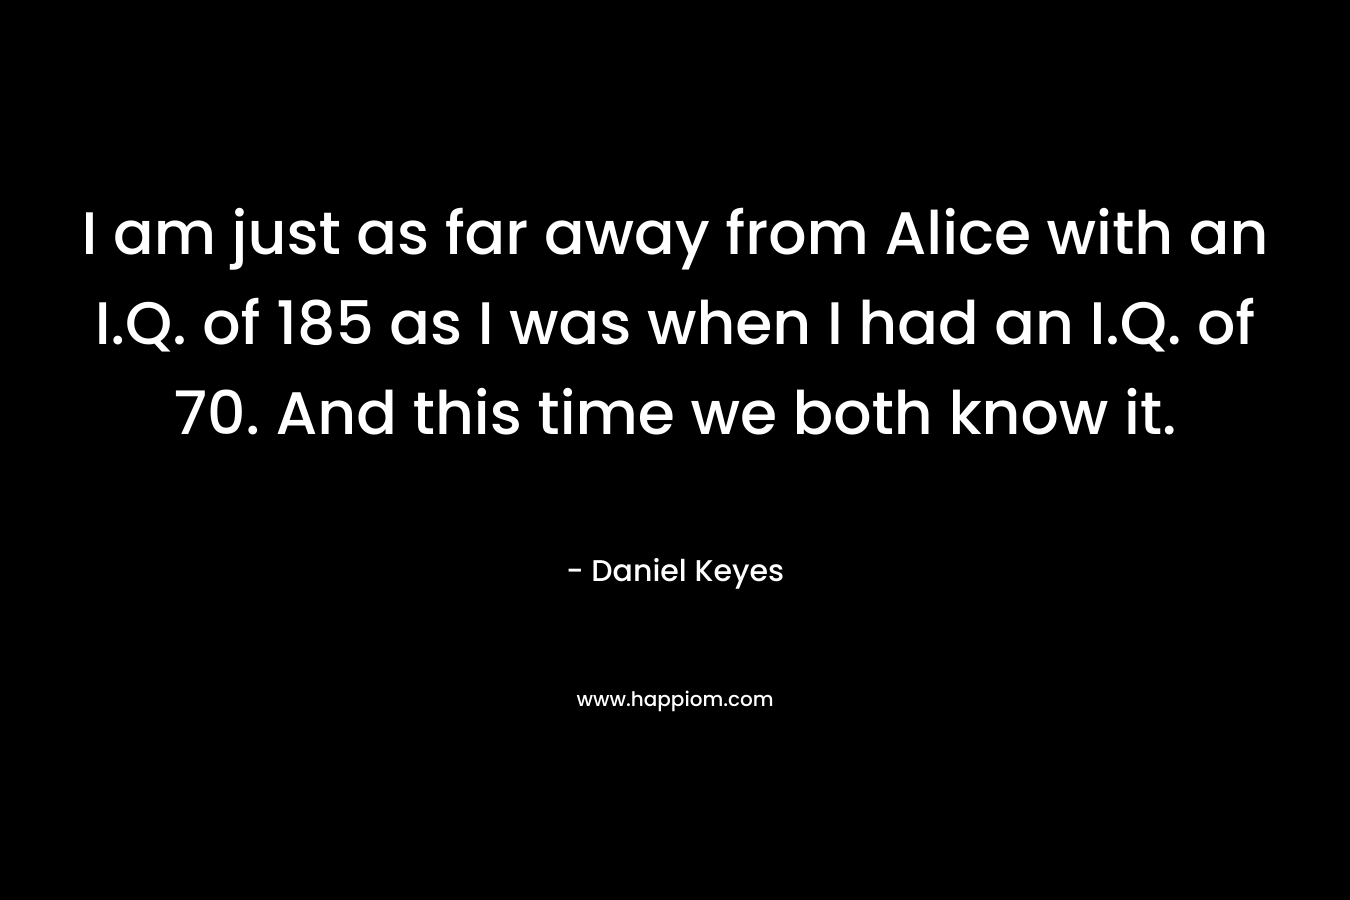 I am just as far away from Alice with an I.Q. of 185 as I was when I had an I.Q. of 70. And this time we both know it.